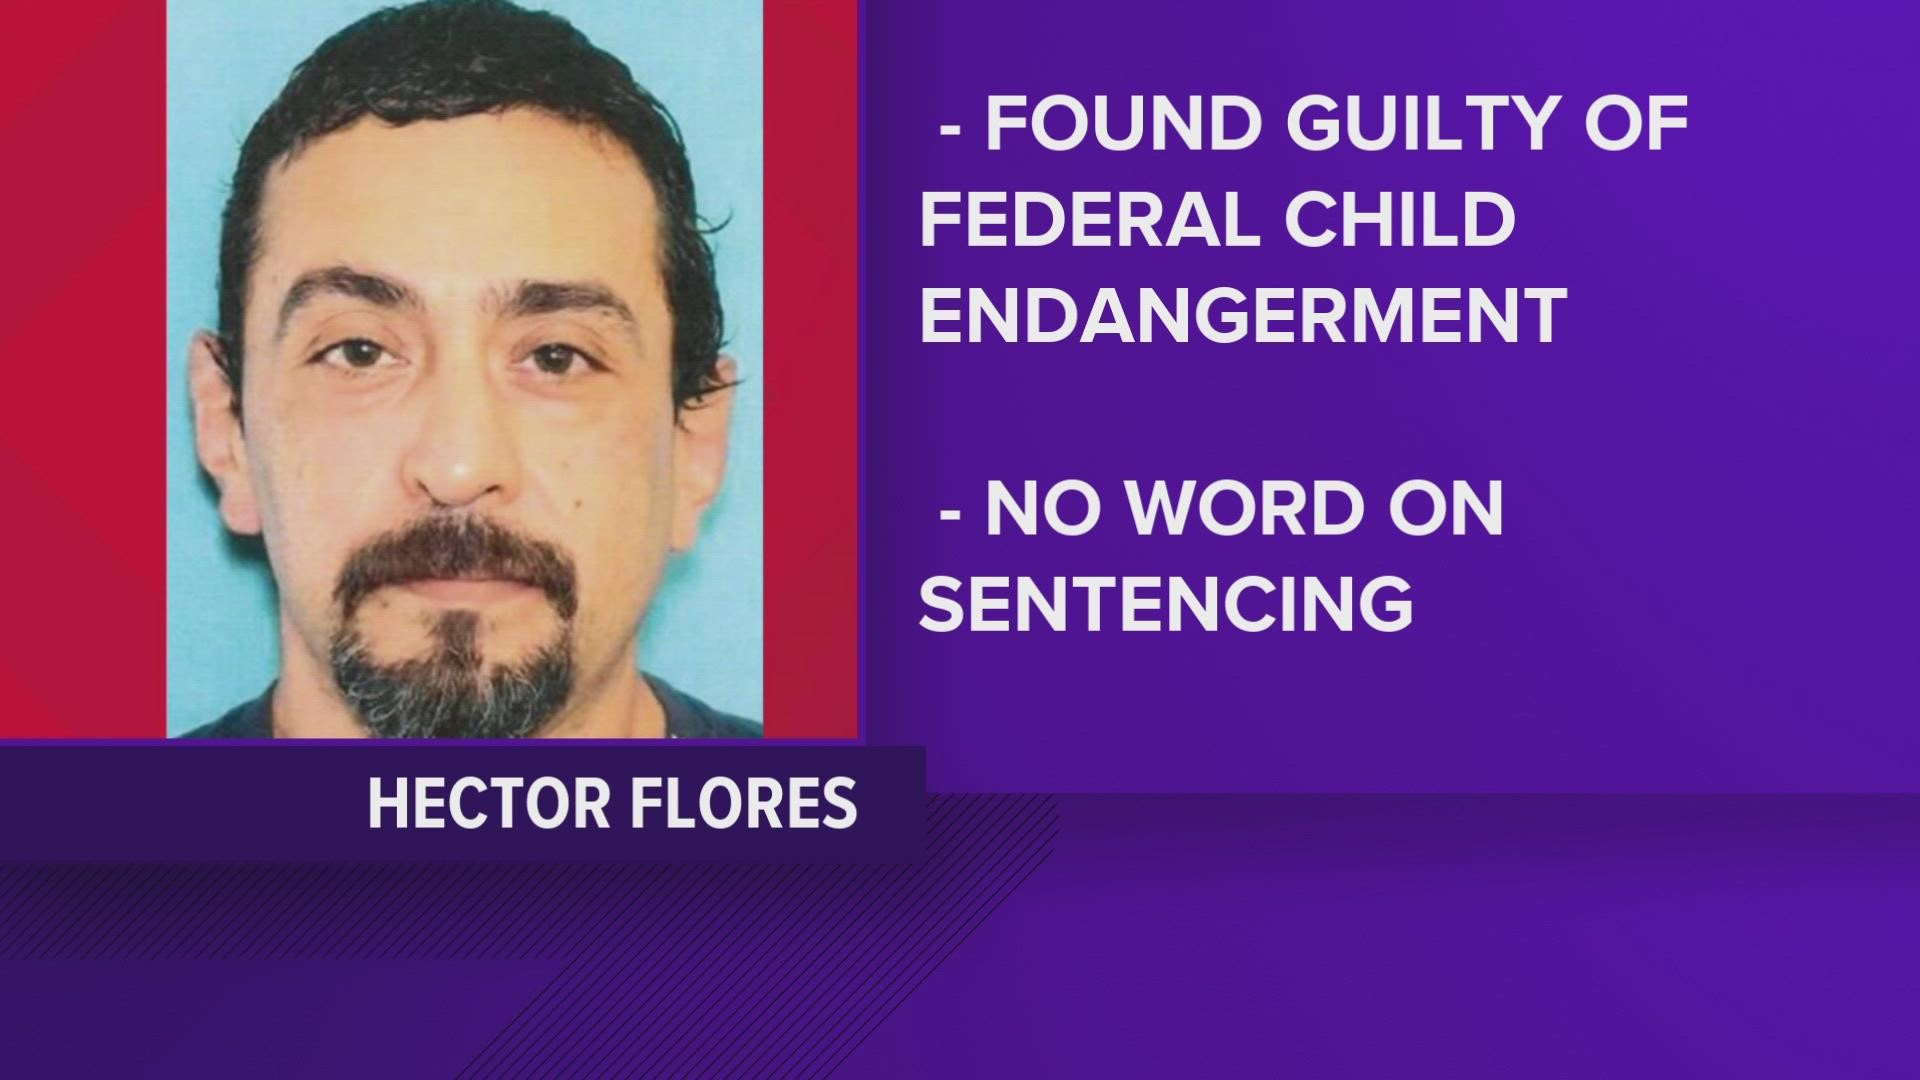 Hector Flores Jr. was found Guilty on Child Endangerment charges.